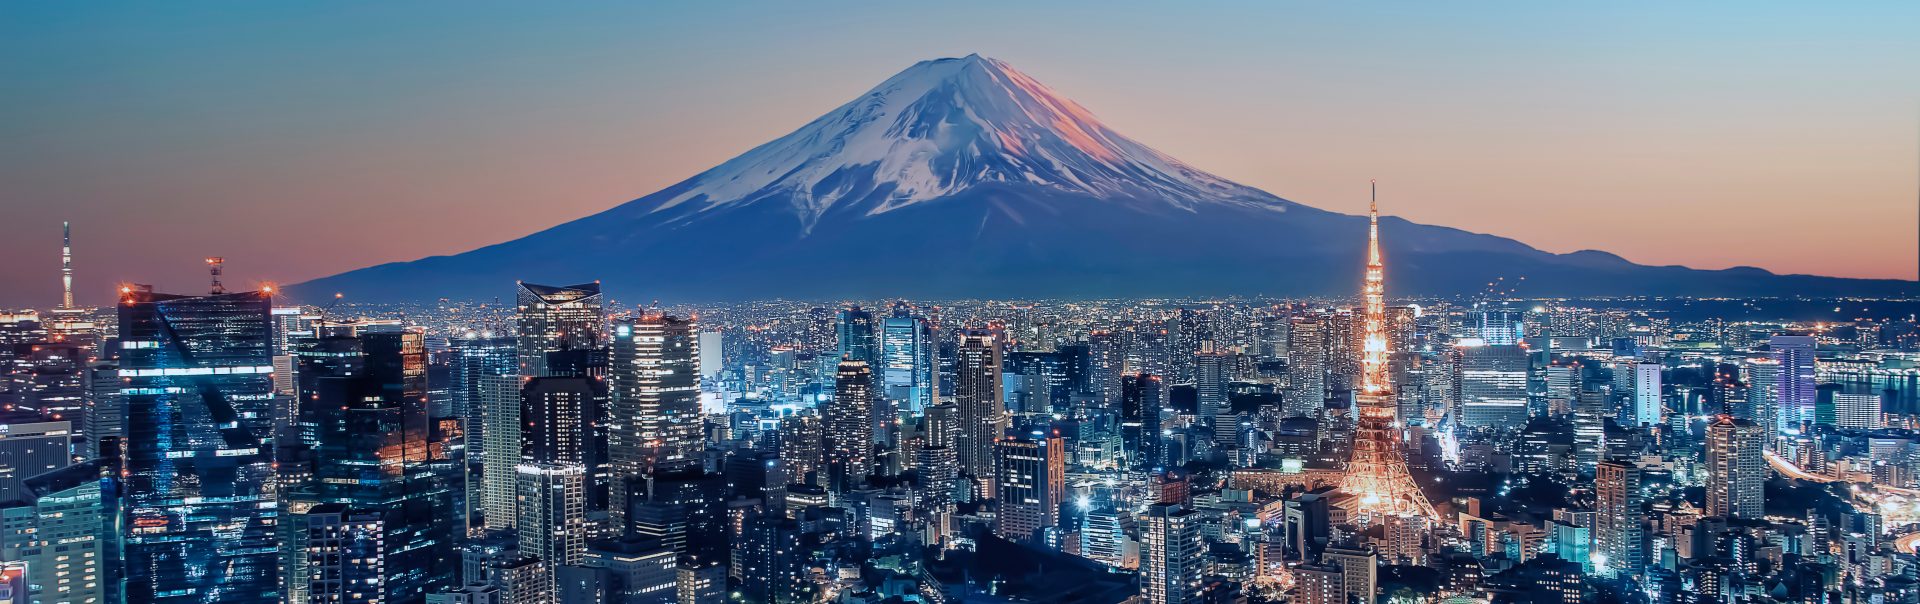 The image shows the city of Tokyo at dusk.